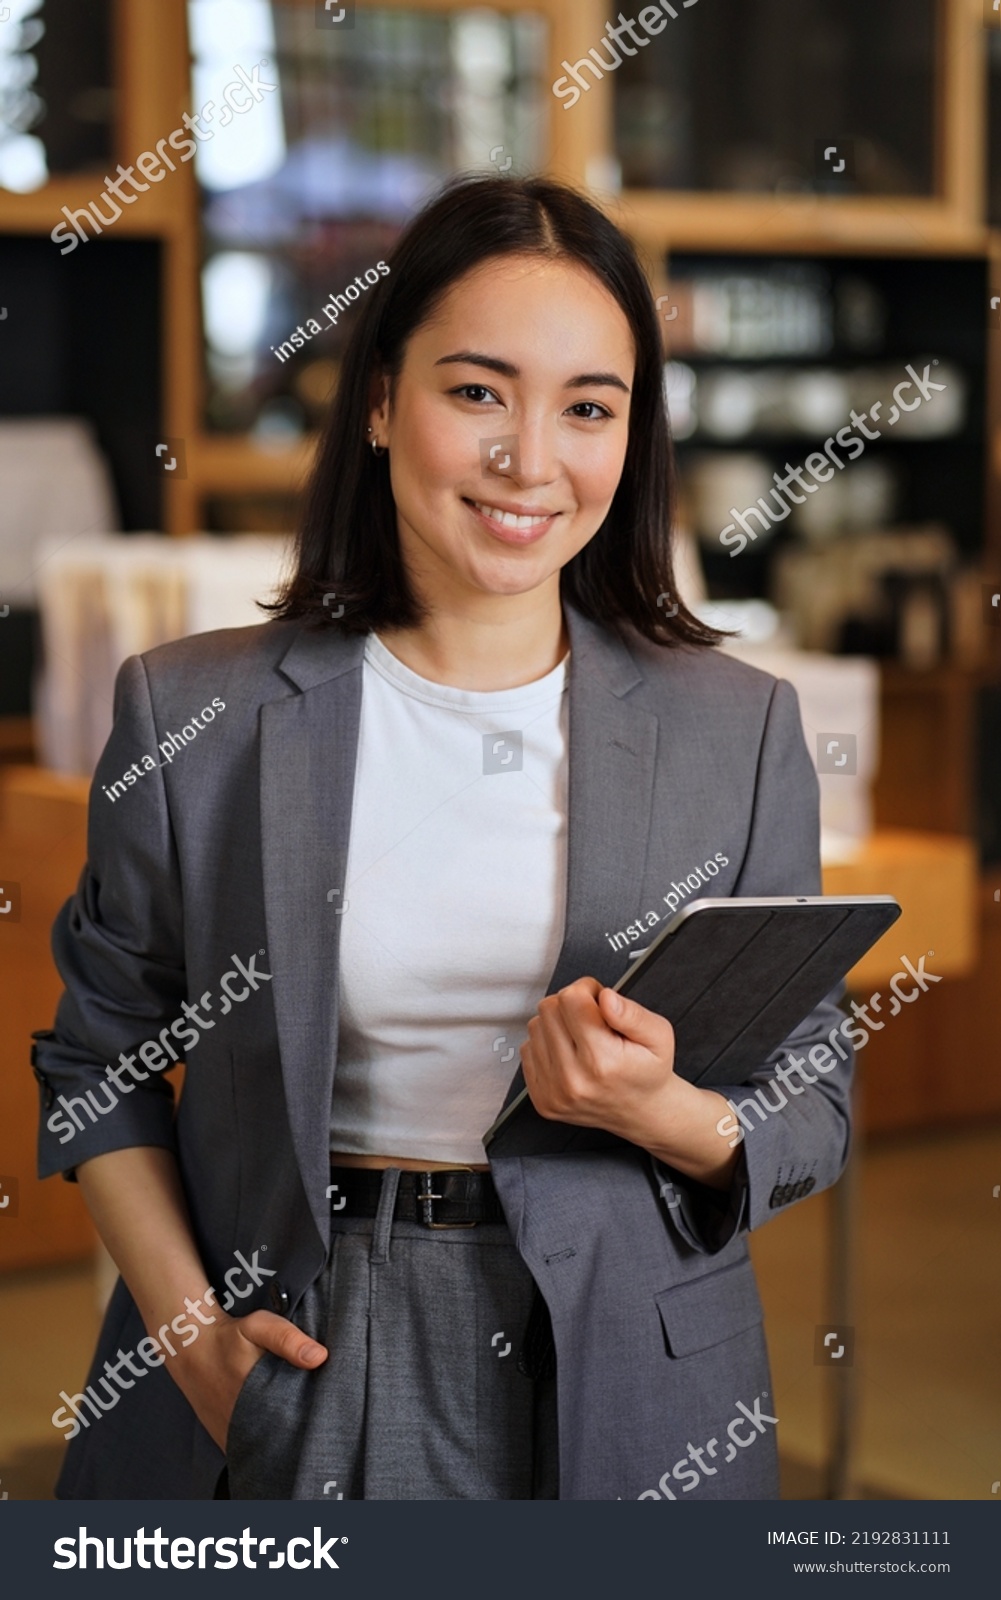 Young smiling successful professional leader Asian business woman, female executive manager, saleswoman wearing suit holding digital tablet standing in office looking at camera, vertical portrait. #2192831111